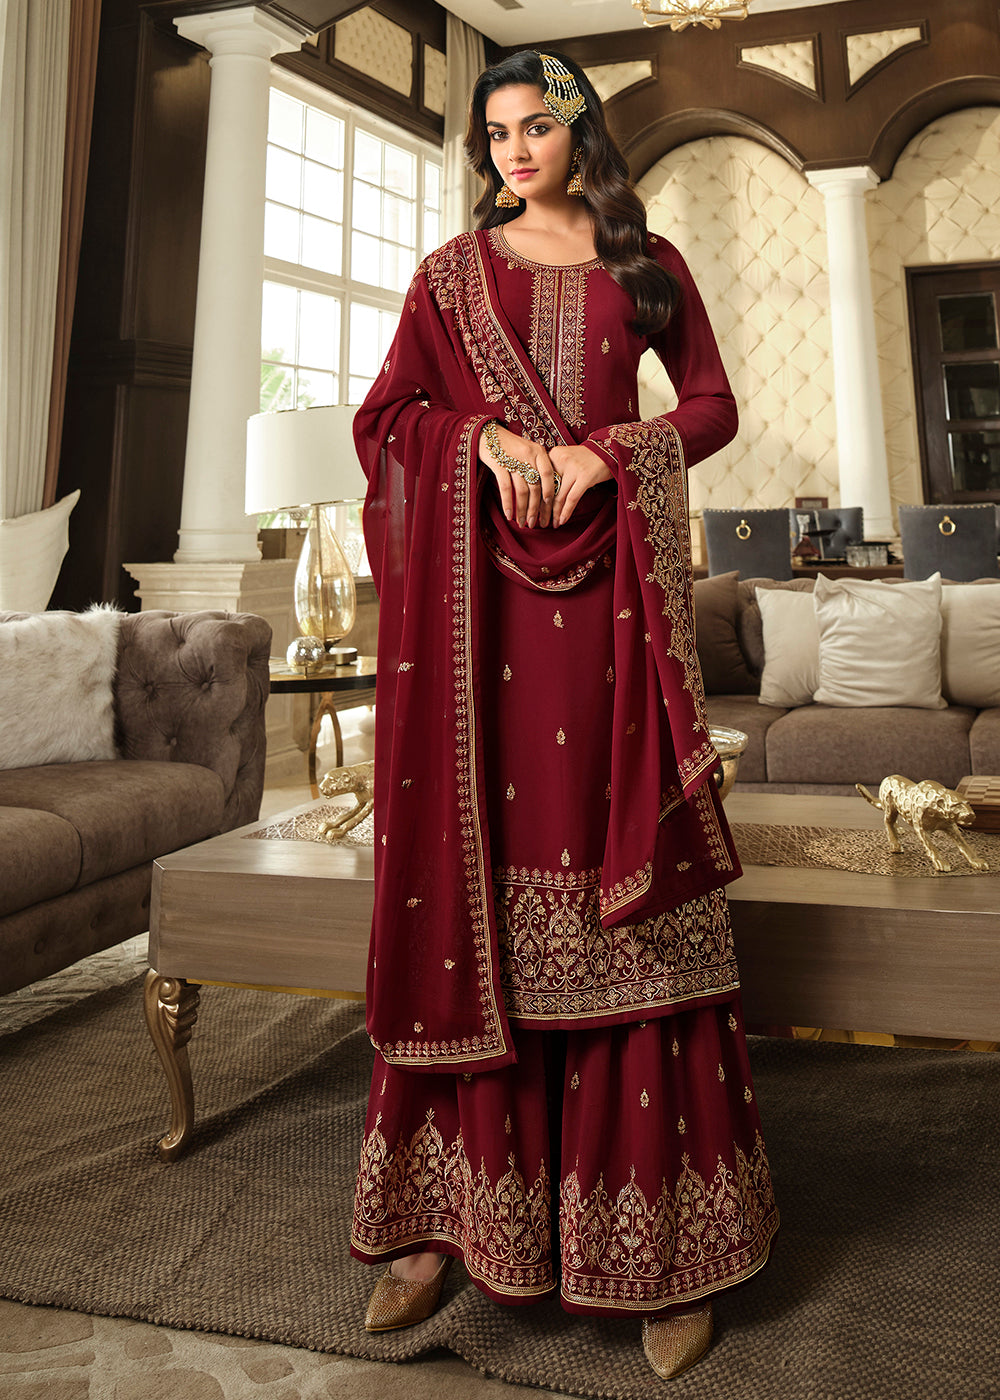 Shop Now Lovely Maroon Embroidered Georgette Pakistani Gharara Suit Online at Empress Clothing in USA, UK, Canada, Germany & Worldwide.